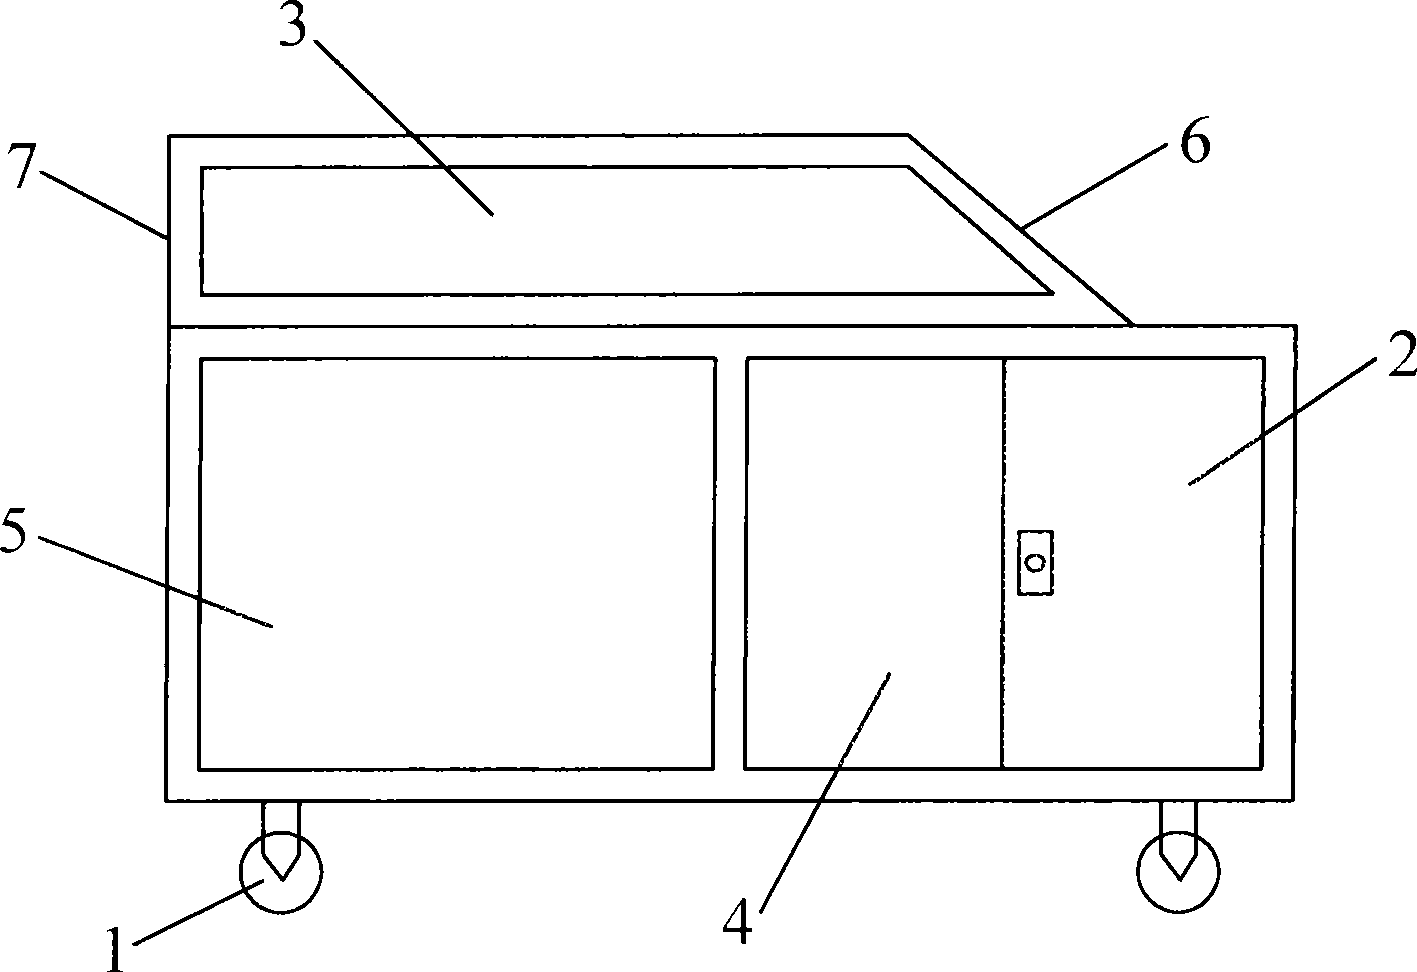 Oil seal control device for aviation turbofan engine in deplaning state